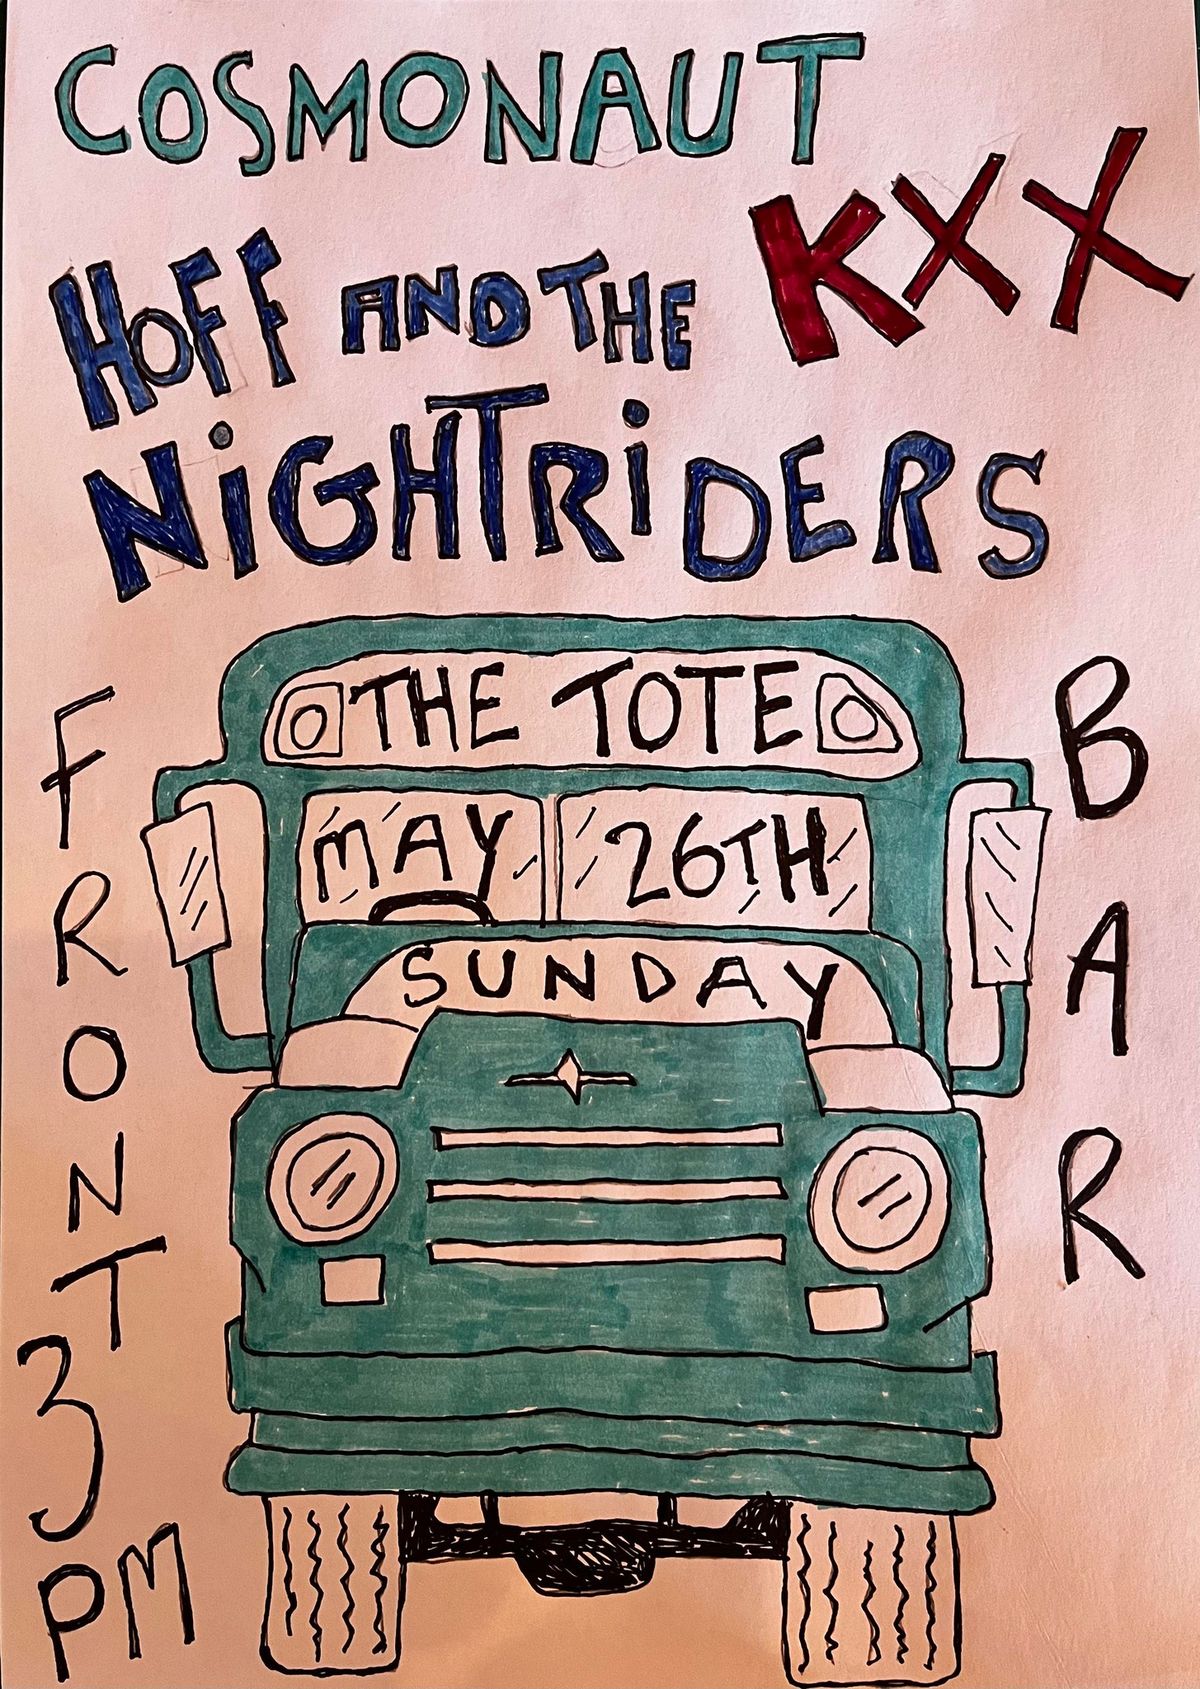 Ratfestation! The Tote, Front Bar, Free Entry.